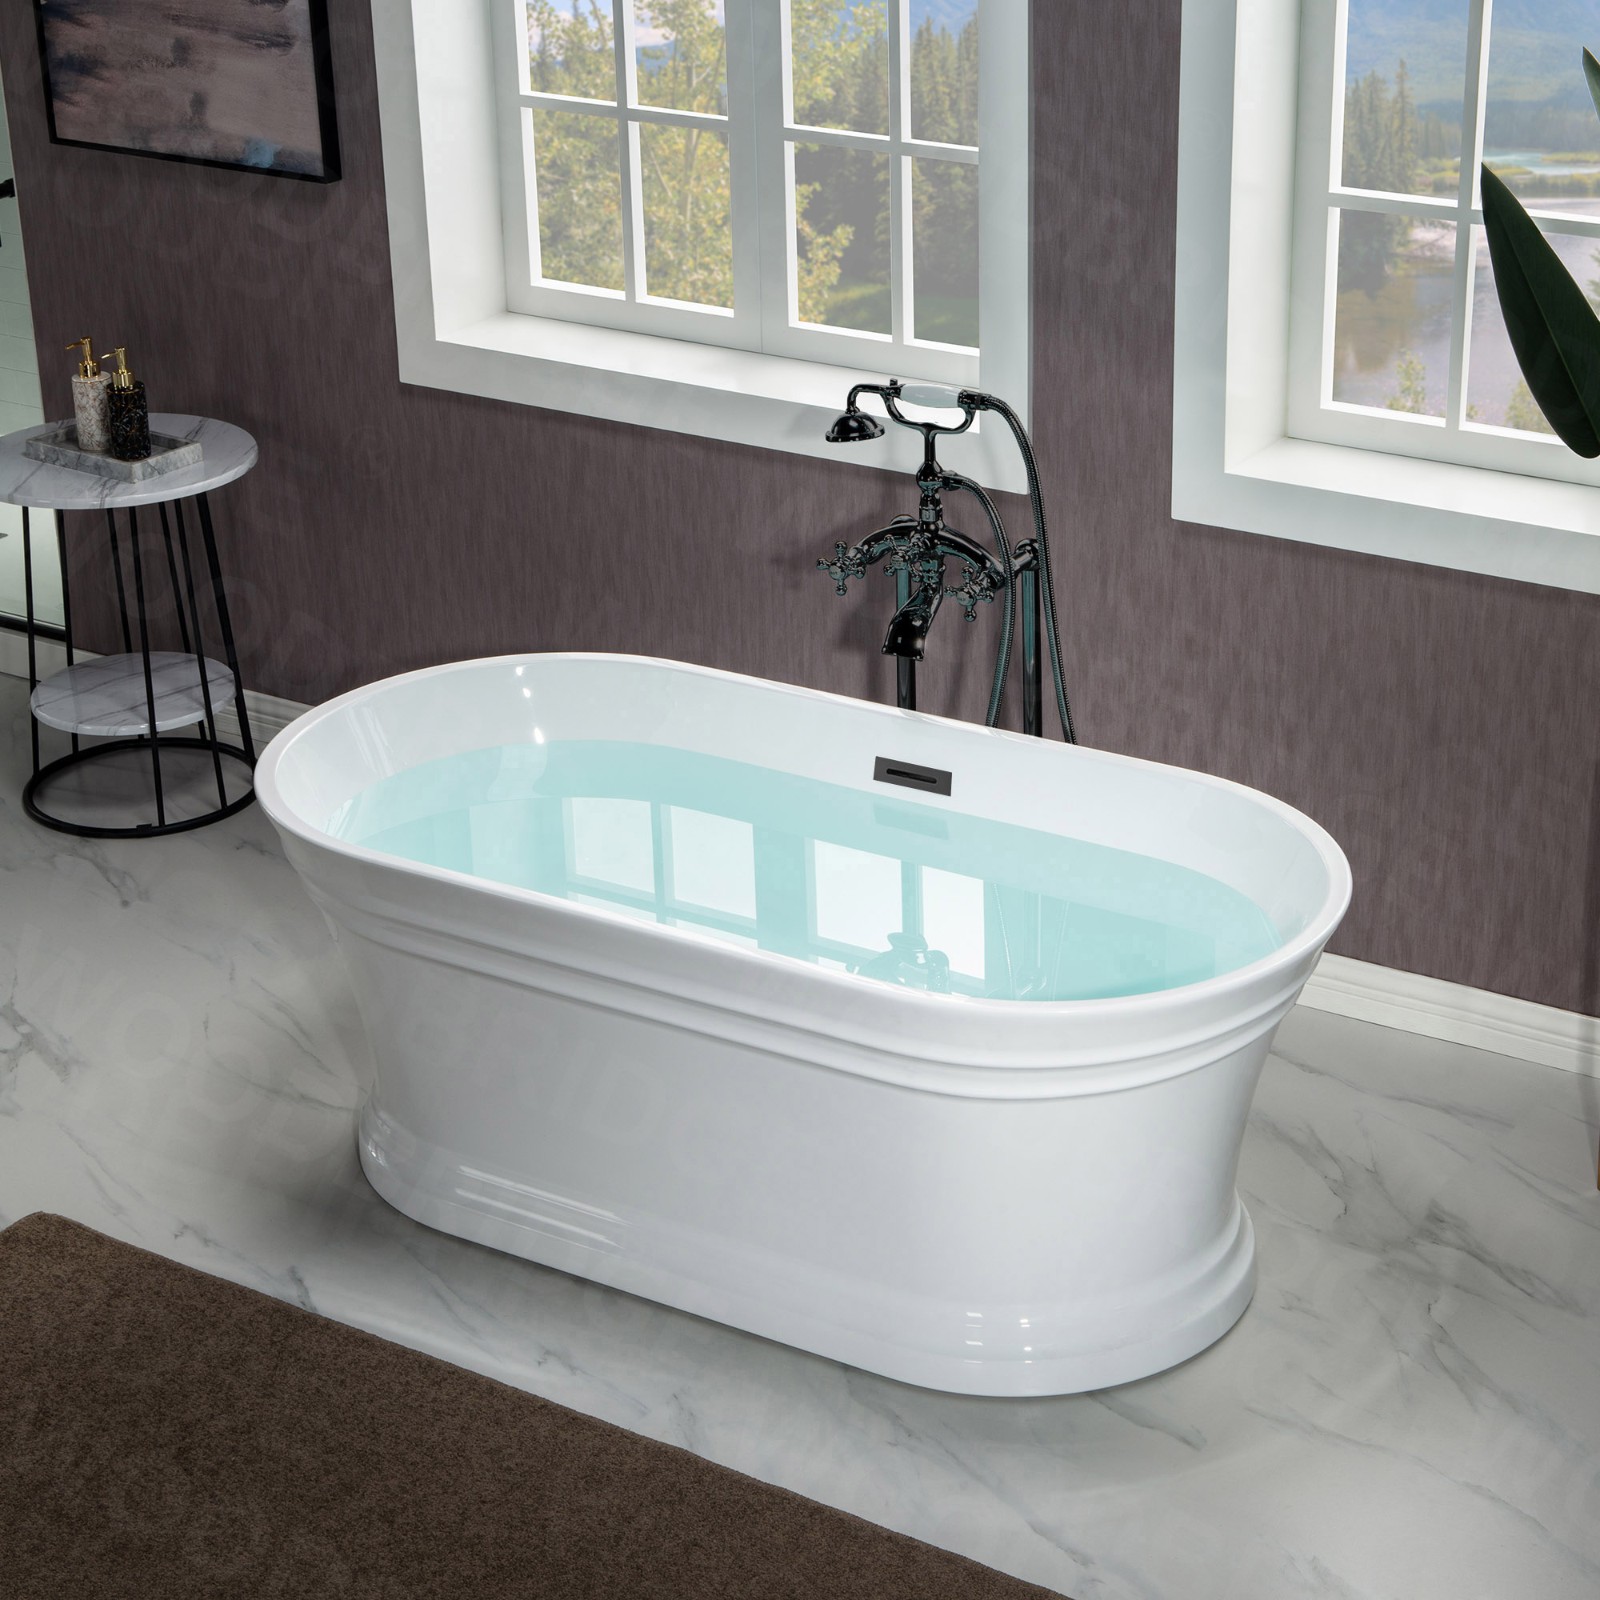  WOODBRIDGE 59 in. Freestanding Double Ended Acrylic Soaking Bathtub with Center Drain Assembly and Overflow, BTA1536/B1536, Glossy White_7816